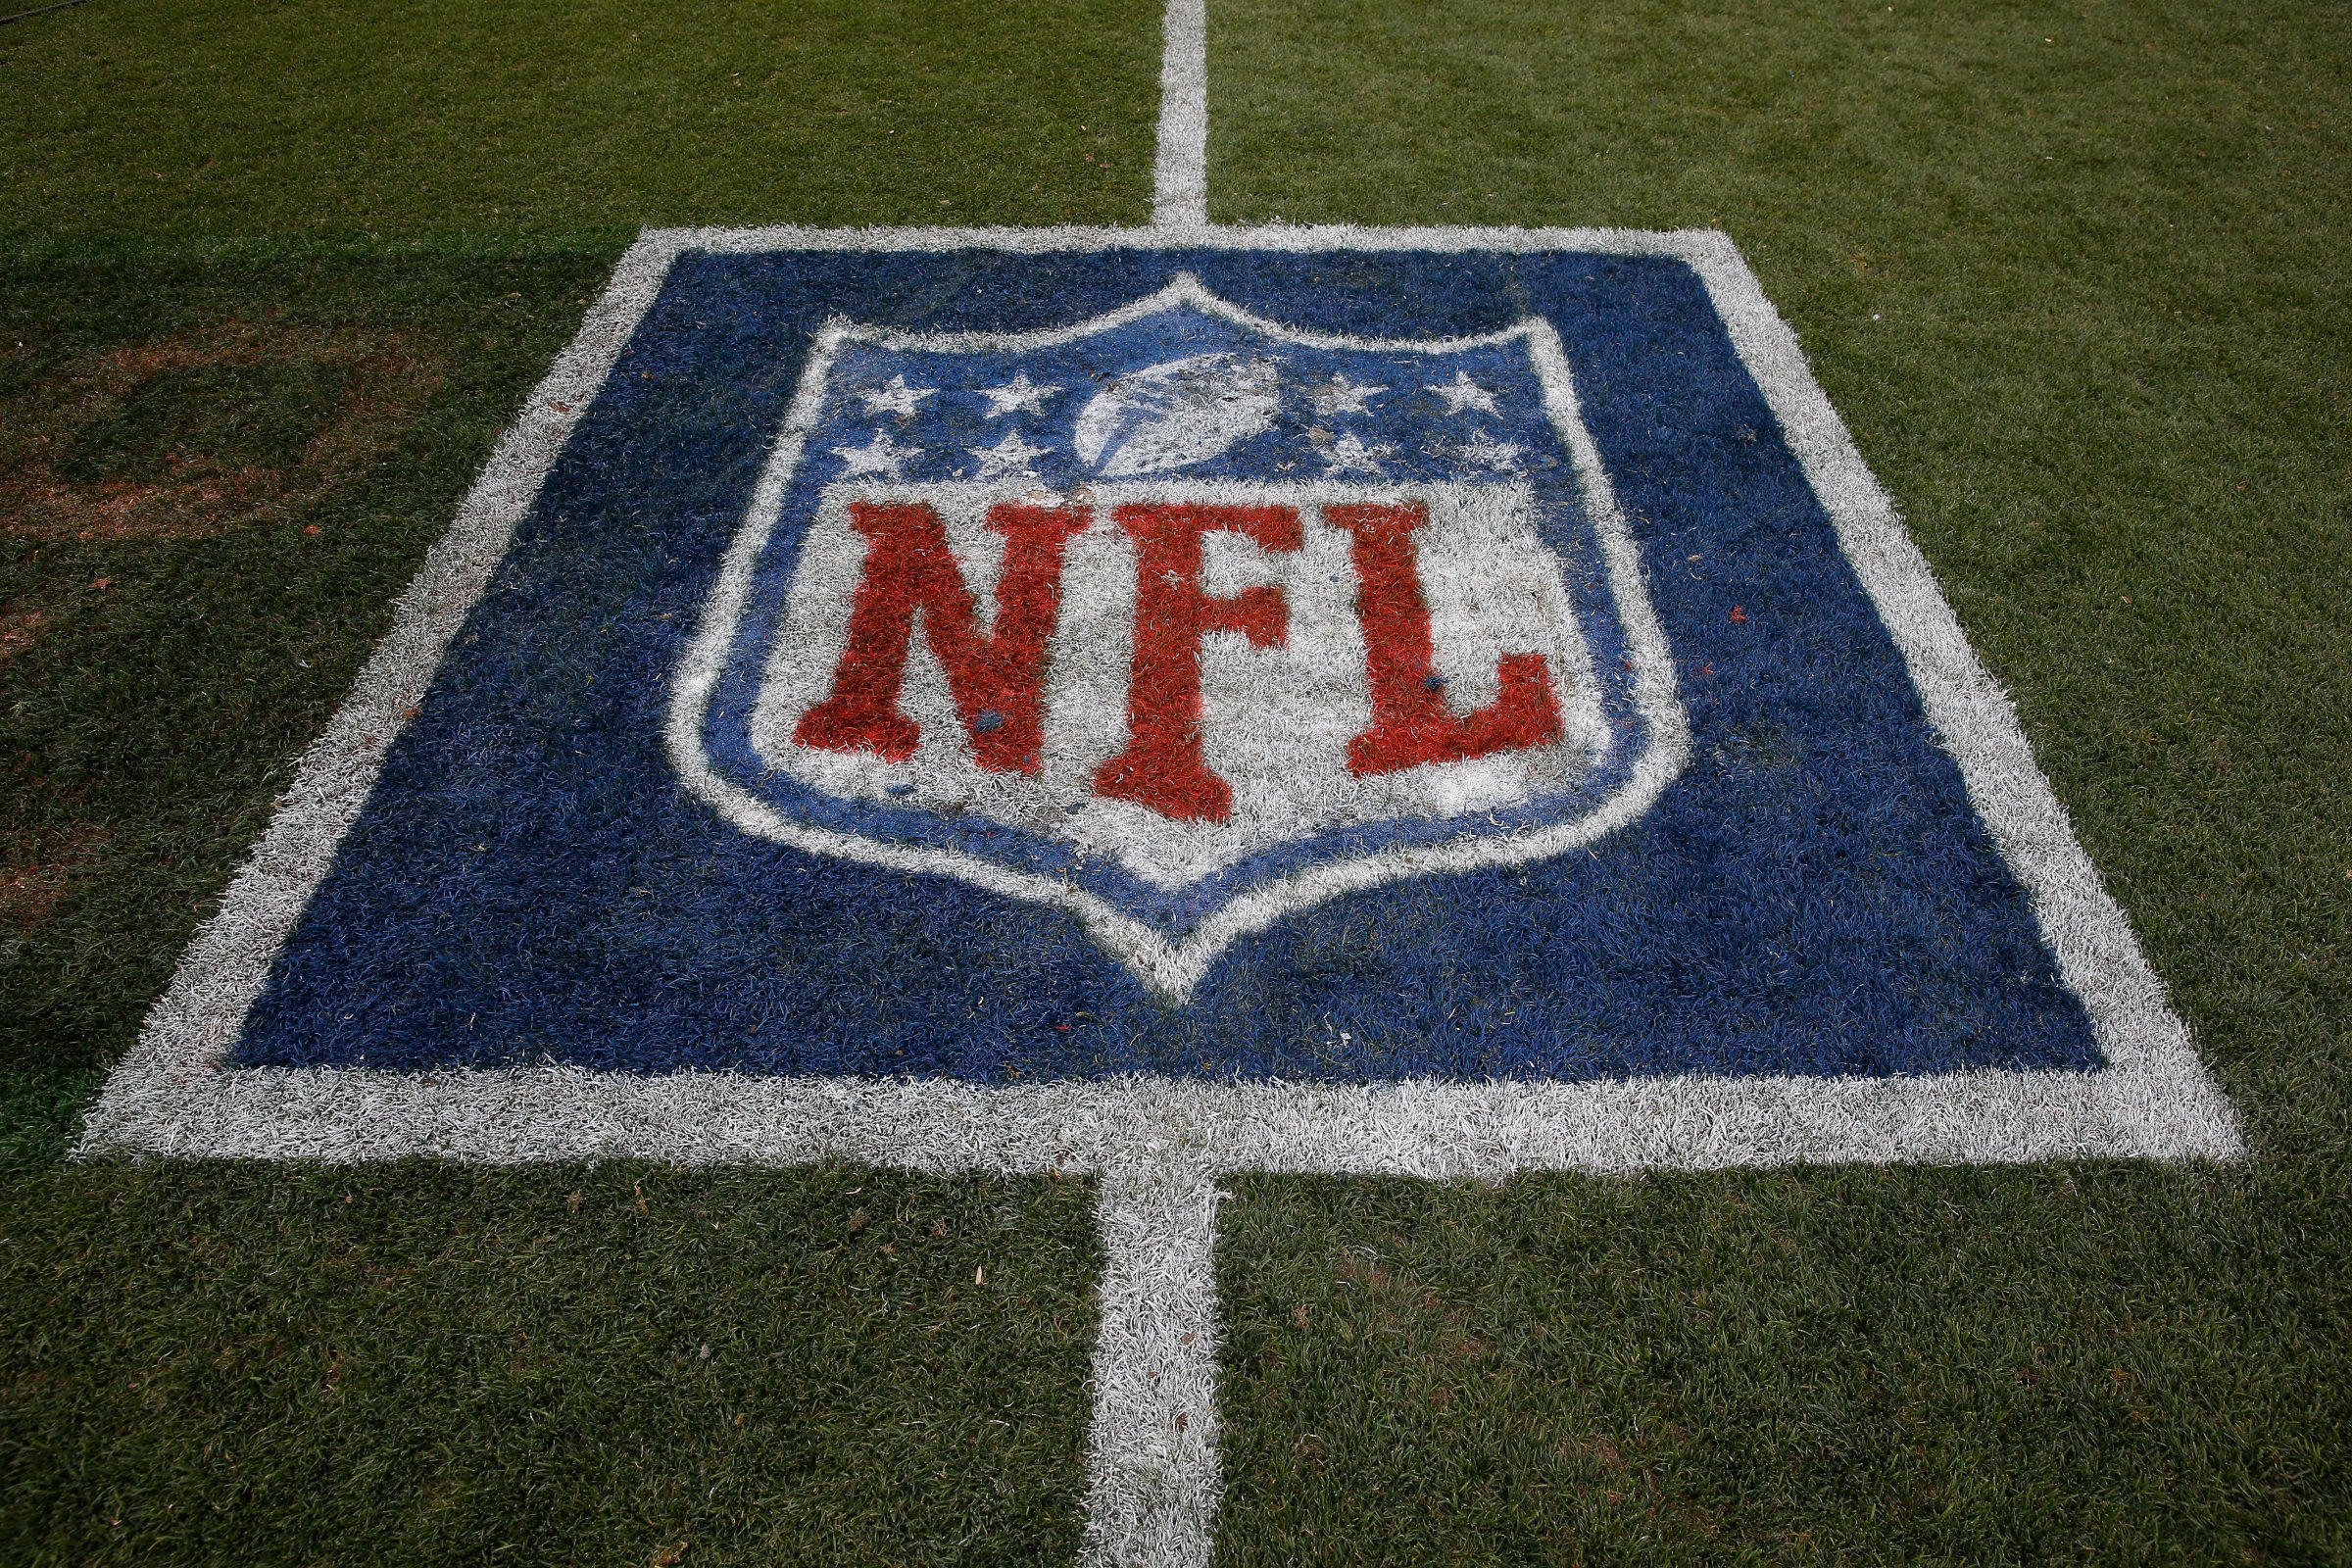 The NFL logo is displayed on the turf on September 14, 2014.